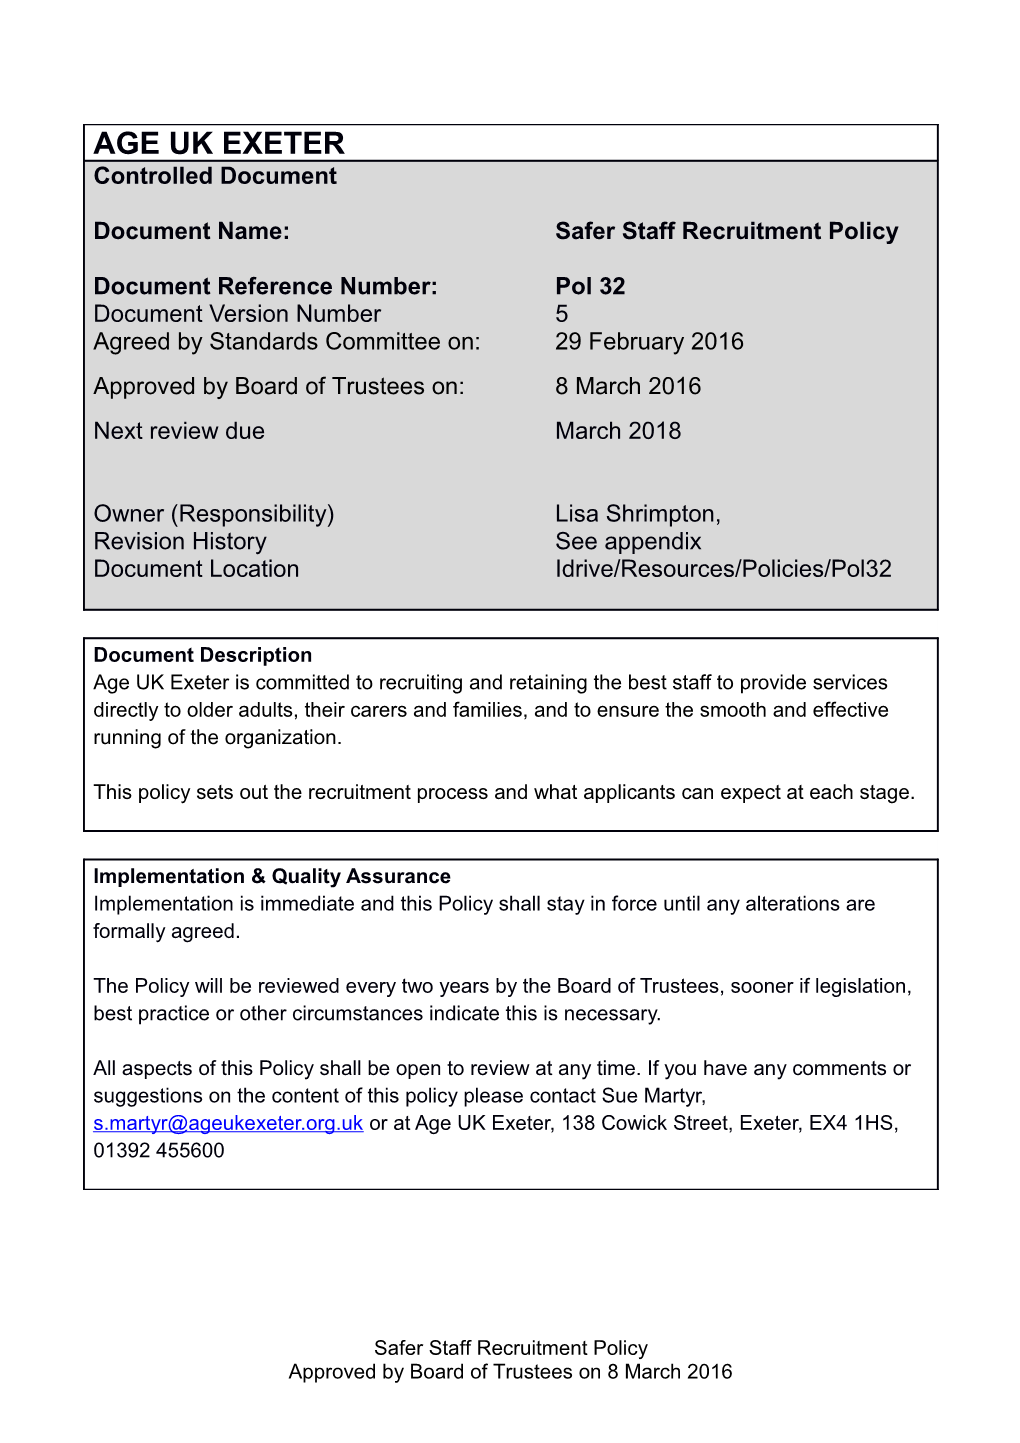 Safer Staff Recruitment Policy